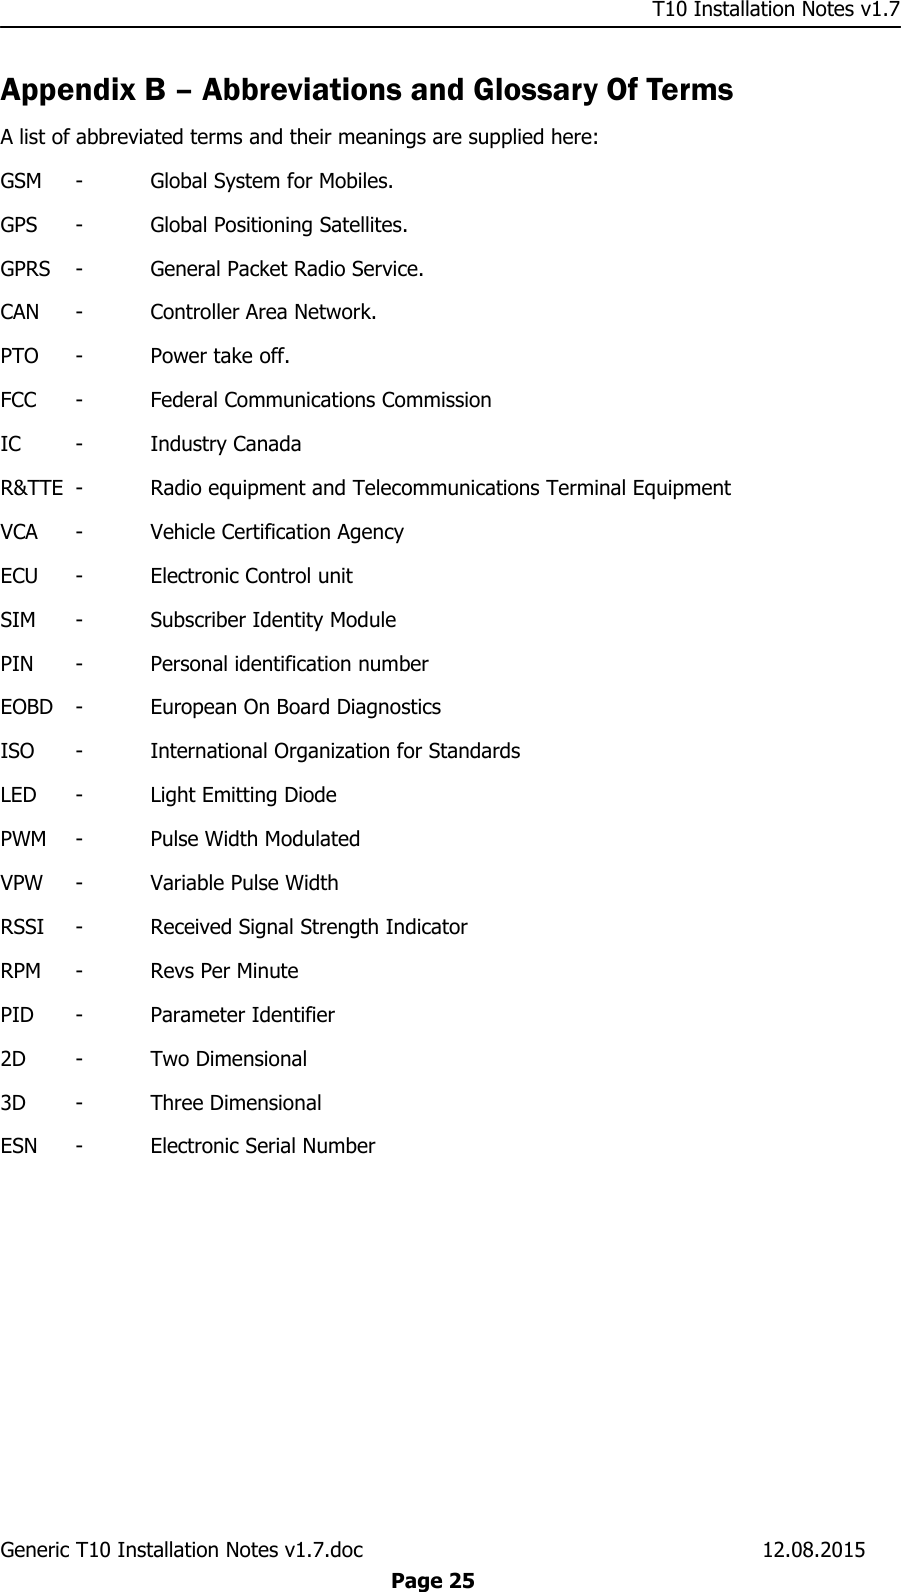     T10 Installation Notes v1.7 Generic T10 Installation Notes v1.7.doc    12.08.2015  Page 25 Appendix B – Abbreviations and Glossary Of Terms A list of abbreviated terms and their meanings are supplied here: GSM  -  Global System for Mobiles. GPS  -  Global Positioning Satellites. GPRS  -  General Packet Radio Service. CAN  -  Controller Area Network. PTO  -  Power take off. FCC  -  Federal Communications Commission IC  -  Industry Canada R&amp;TTE  -  Radio equipment and Telecommunications Terminal Equipment VCA  -  Vehicle Certification Agency ECU  -  Electronic Control unit SIM  -  Subscriber Identity Module PIN  -  Personal identification number EOBD  -  European On Board Diagnostics ISO  -  International Organization for Standards LED  -  Light Emitting Diode PWM  -  Pulse Width Modulated VPW  -  Variable Pulse Width RSSI  -  Received Signal Strength Indicator RPM  -  Revs Per Minute PID  -  Parameter Identifier 2D  -  Two Dimensional 3D  -  Three Dimensional ESN  -  Electronic Serial Number 